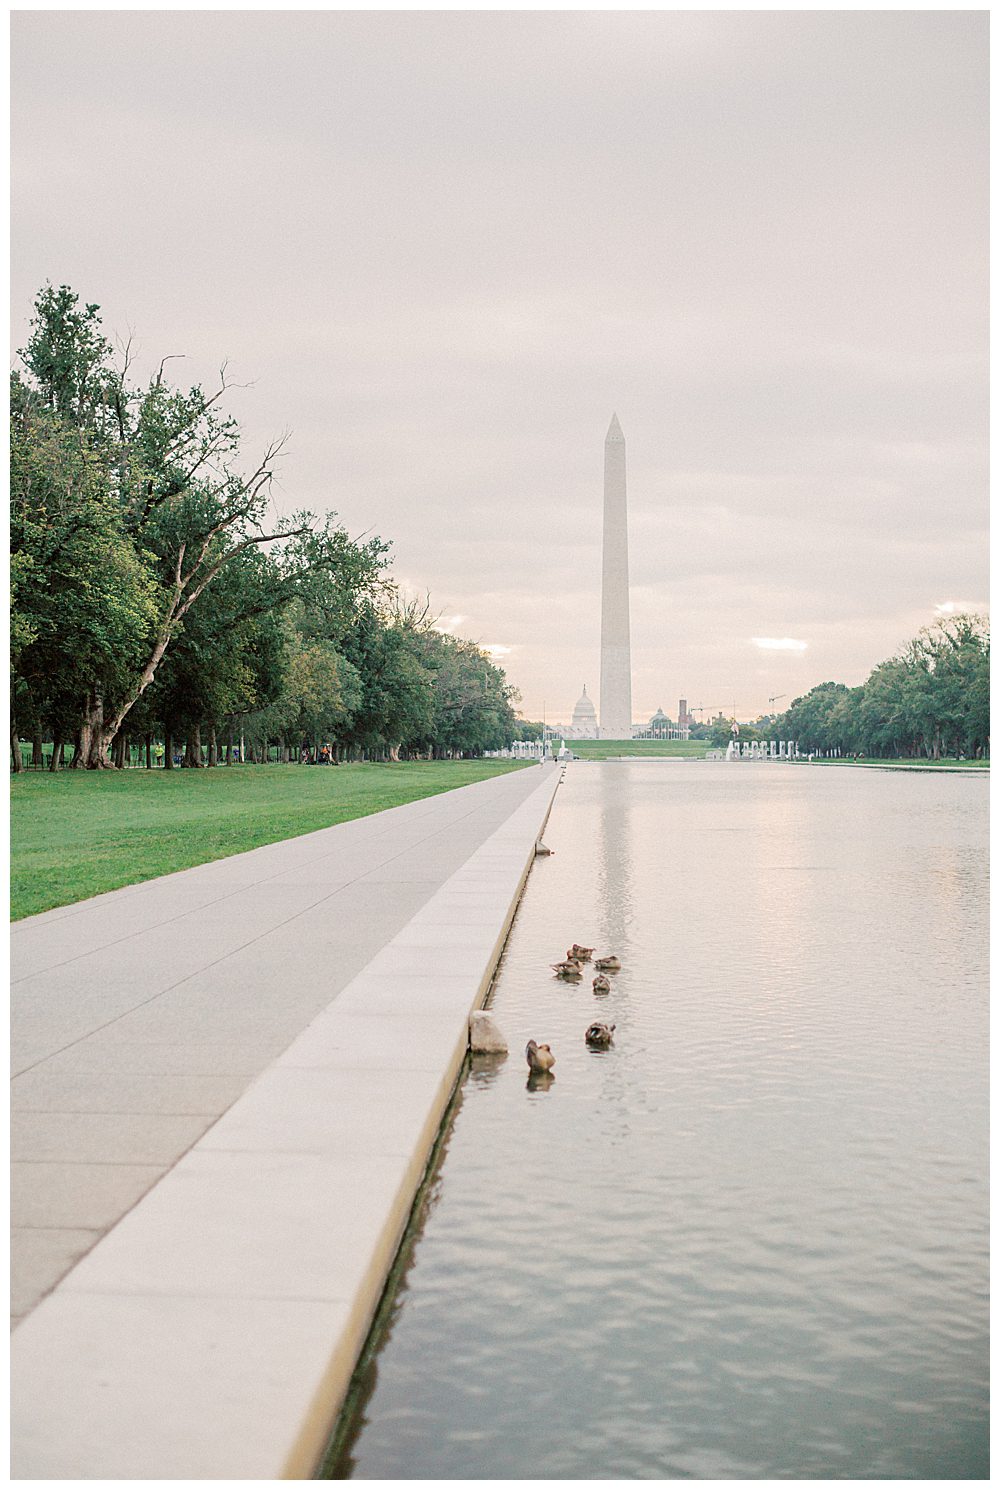 Ducks play in water at DC reflecting pool.